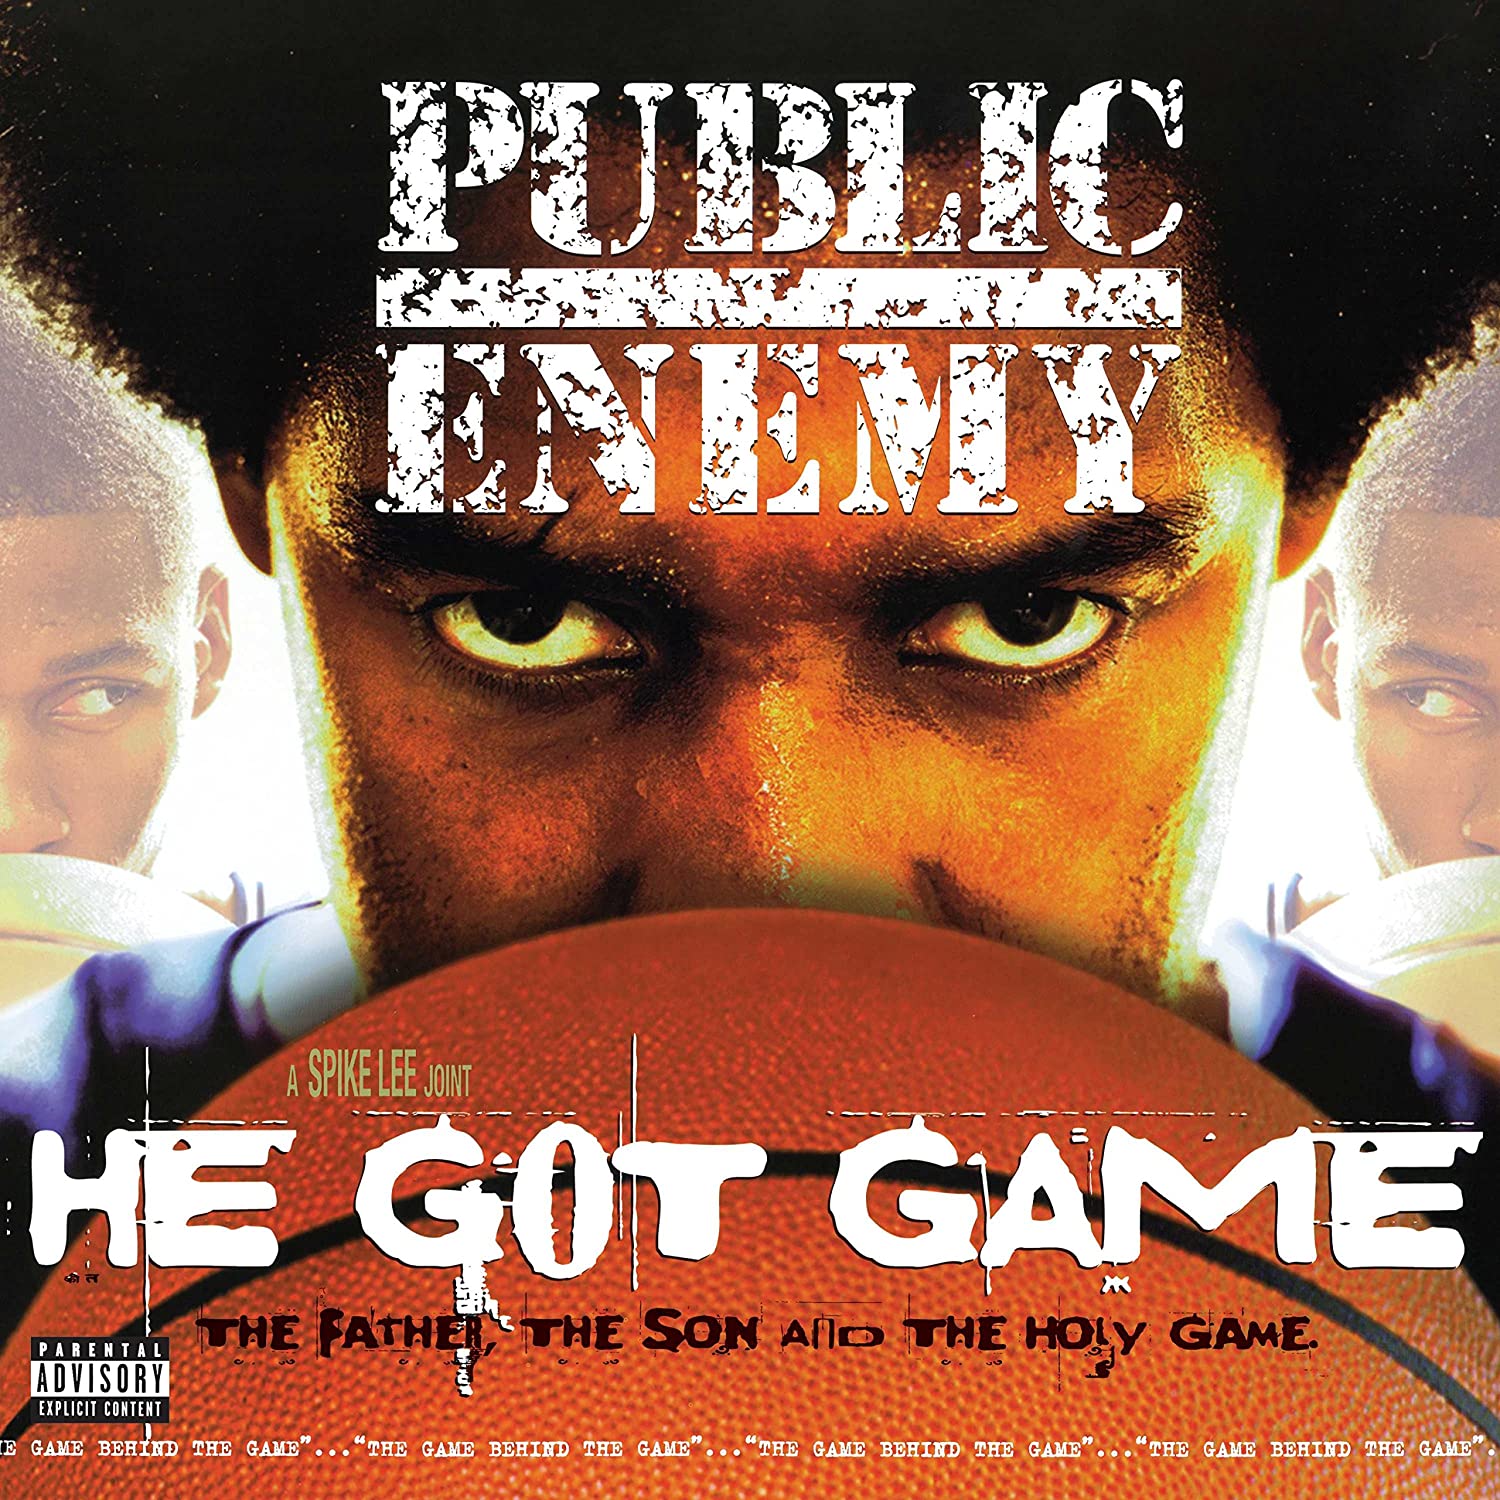 Art for He Got Game Feat. Stephen Stills by Public Enemy (He Got Game - 1998)